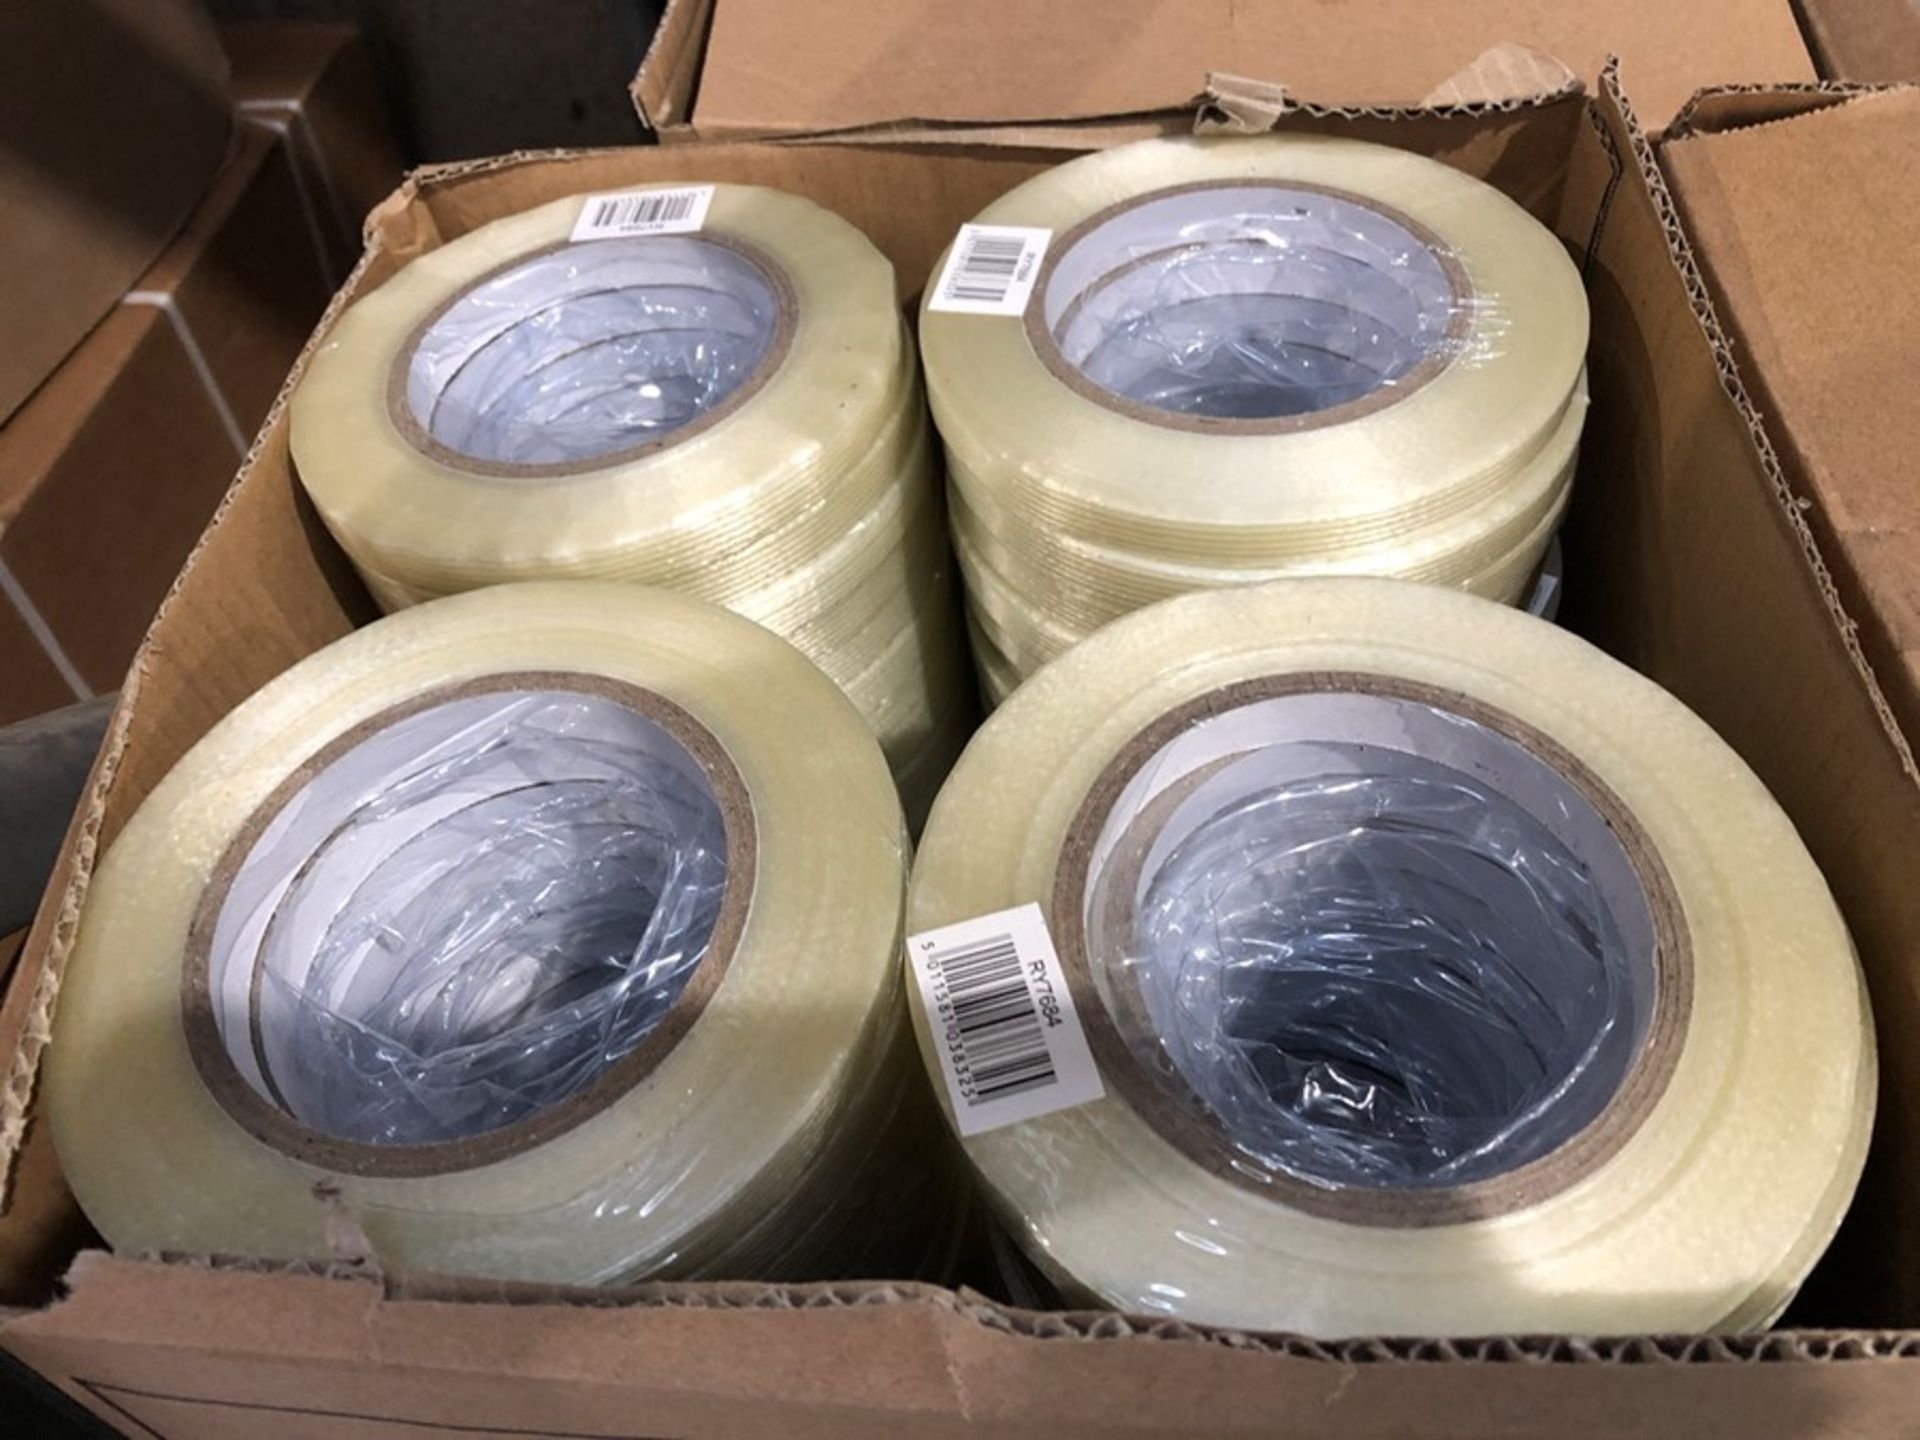 1 BOXED SET TO CONTAIN APPROX 72 ROLLS OF FILAMENT TAPE / SIZE: 12MM X 50M (PUBLIC VIEWING